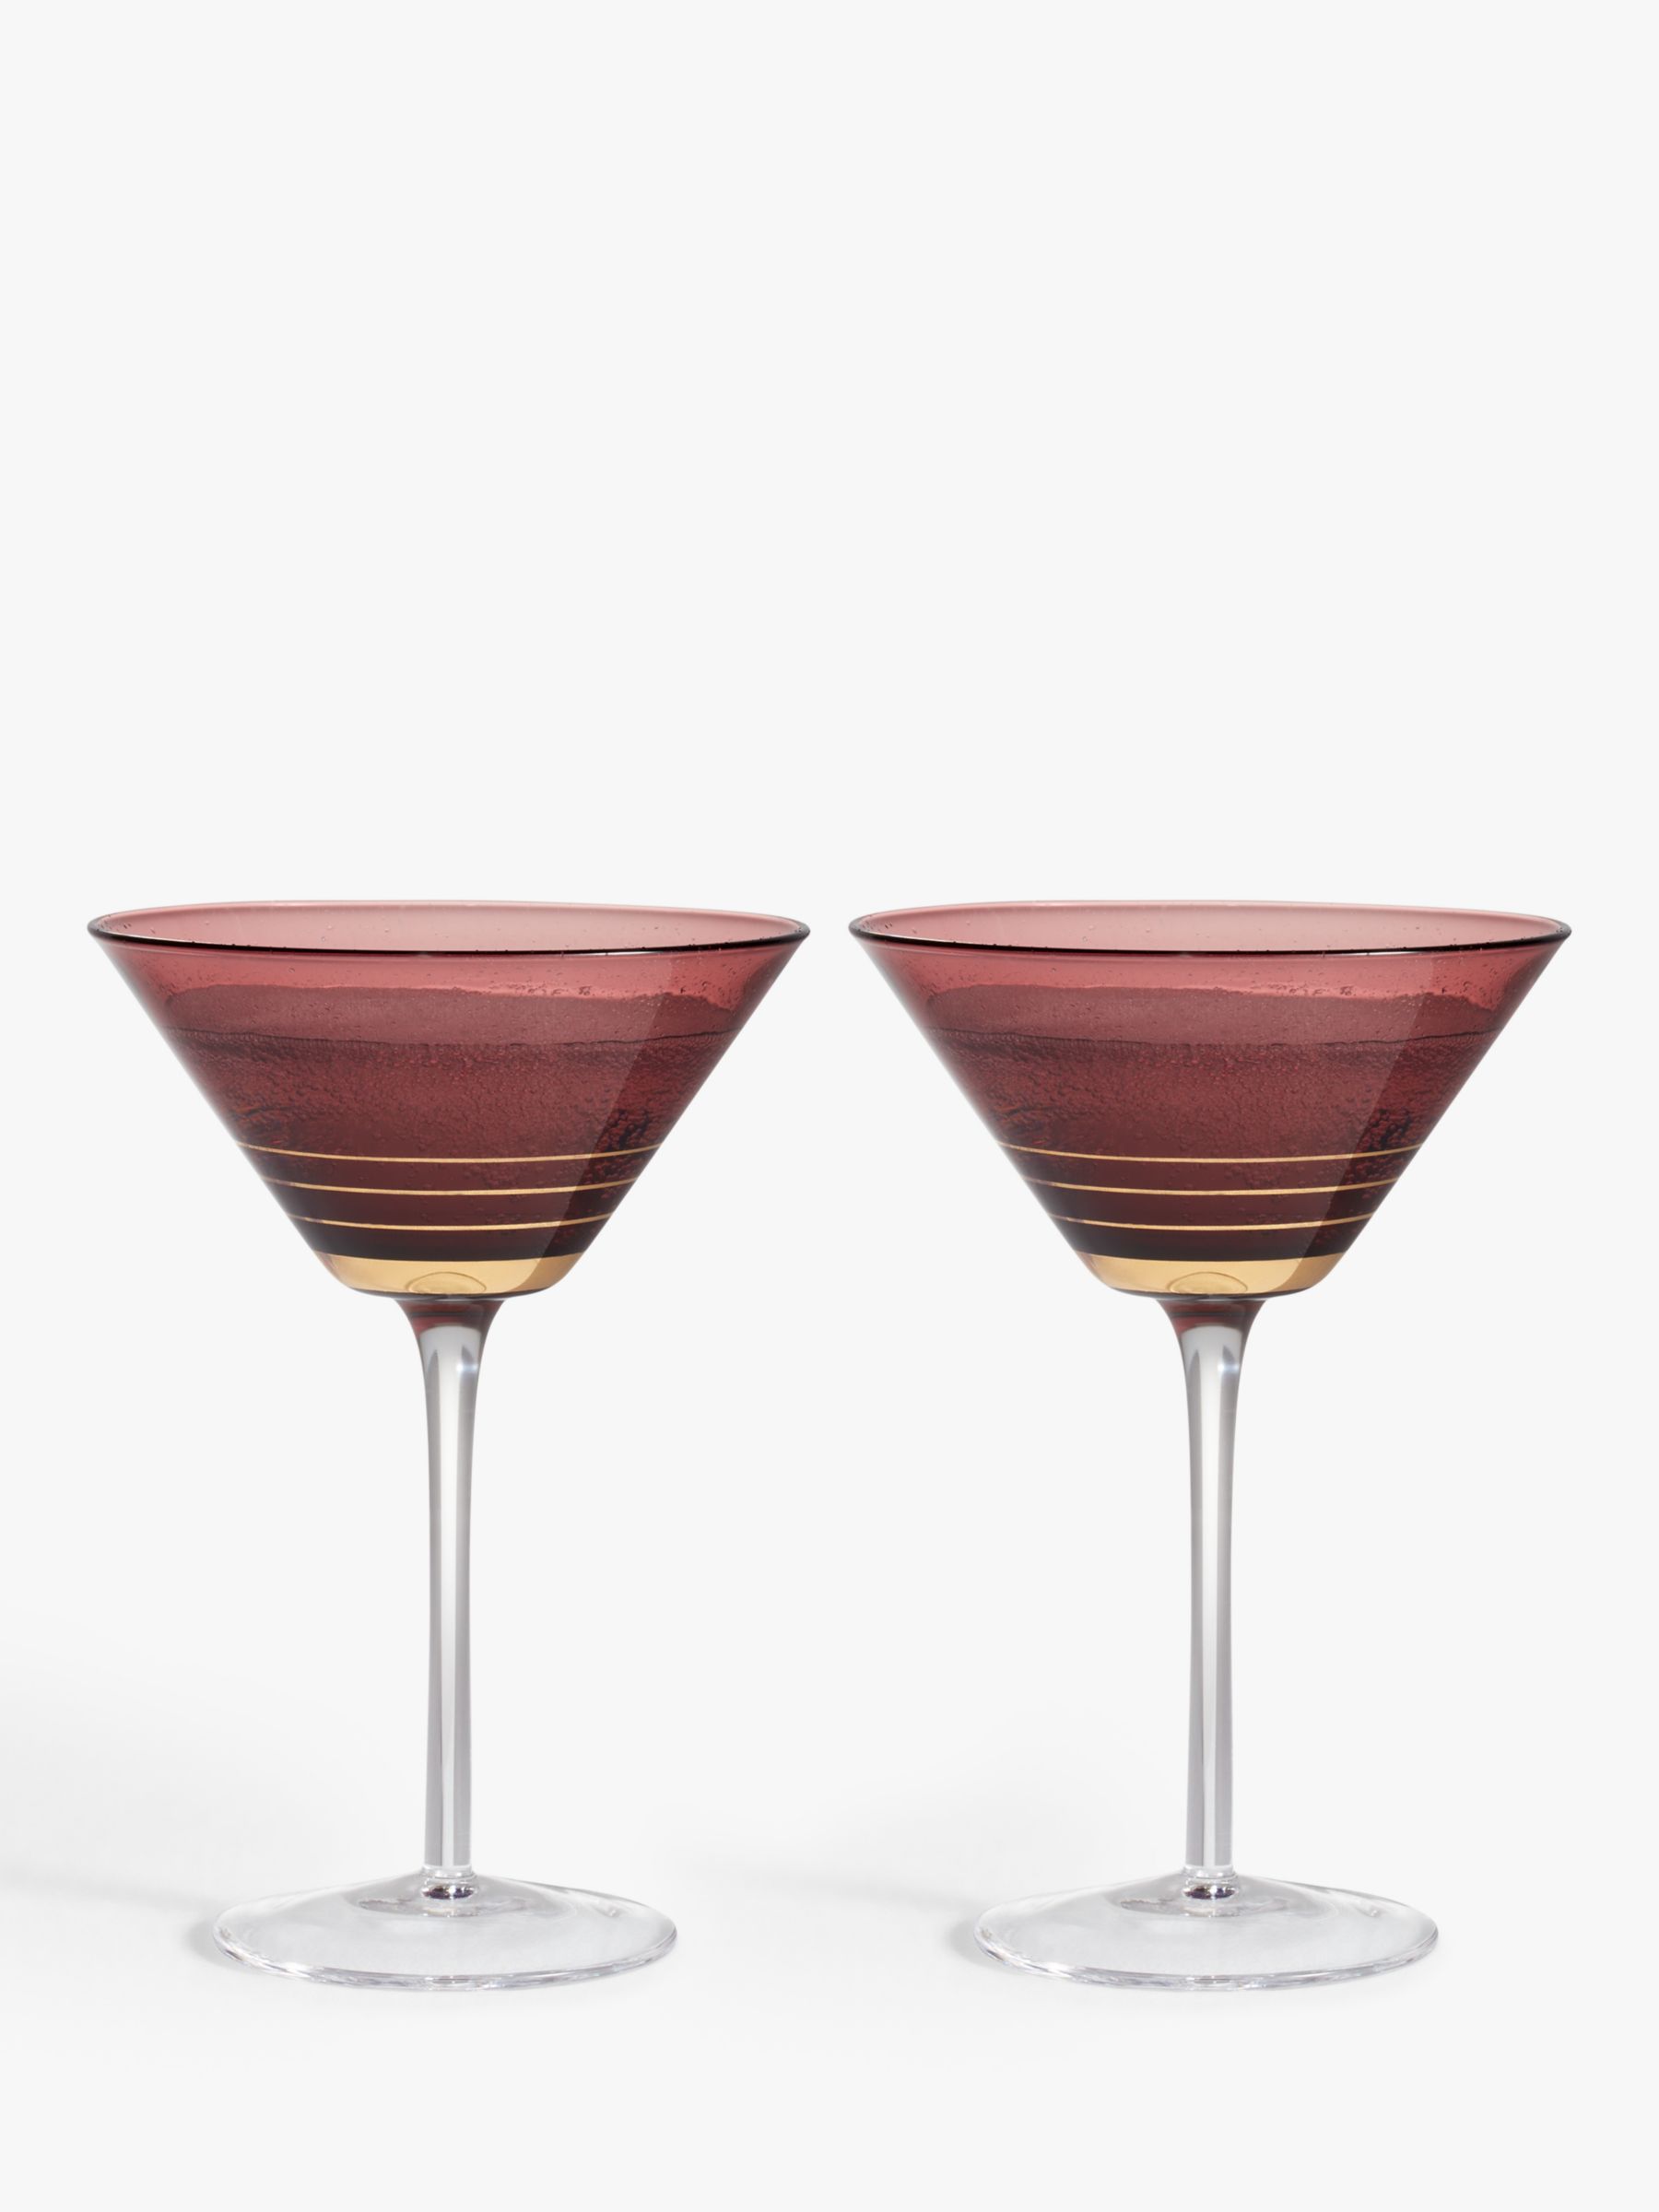 The best Cosmopolitan glasses for living out your SATC dream